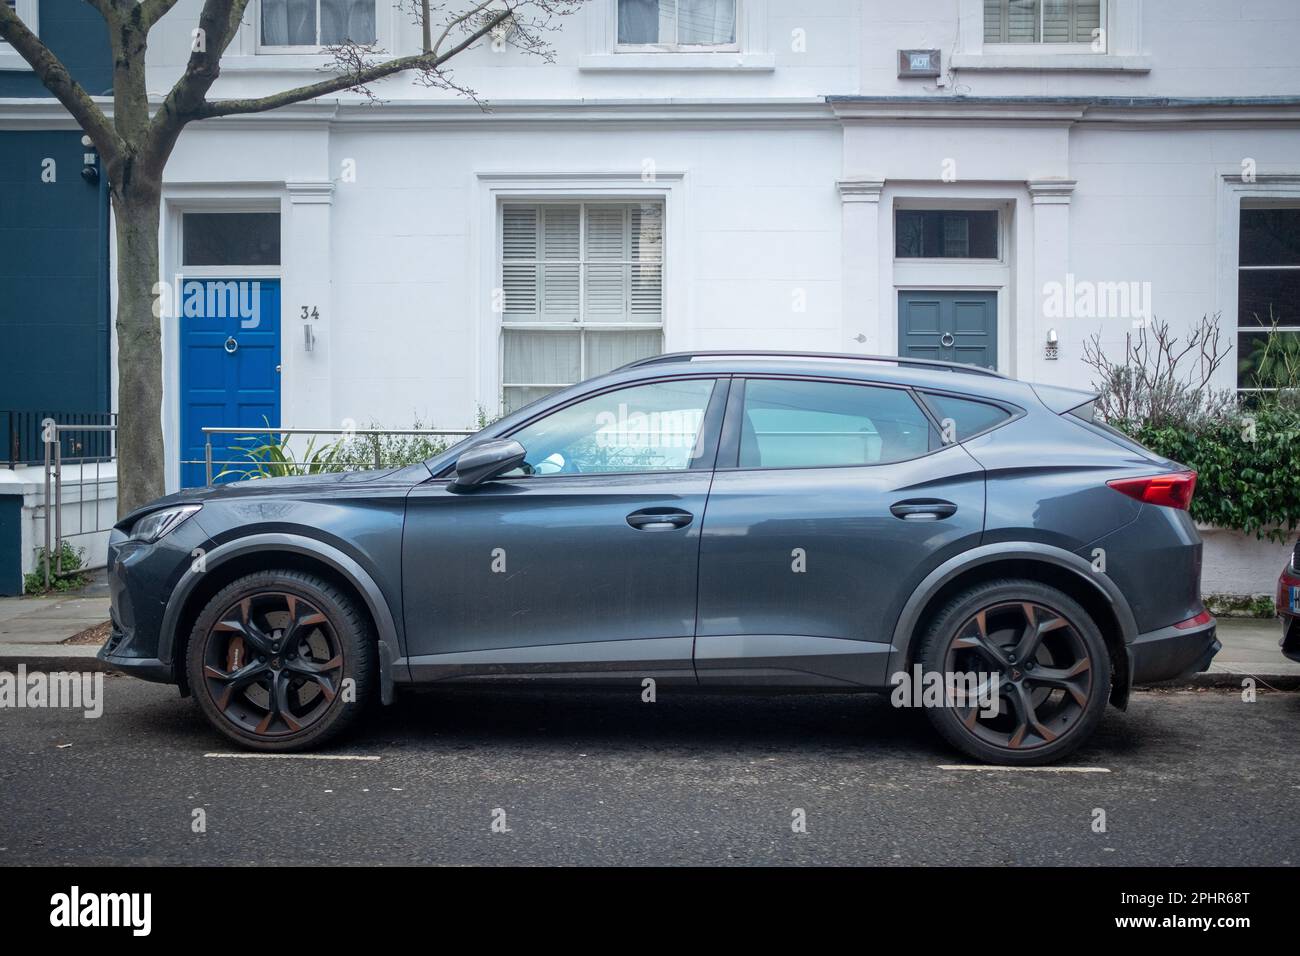 London- January 2023: Cupra electric car parked on residential street Stock Photo